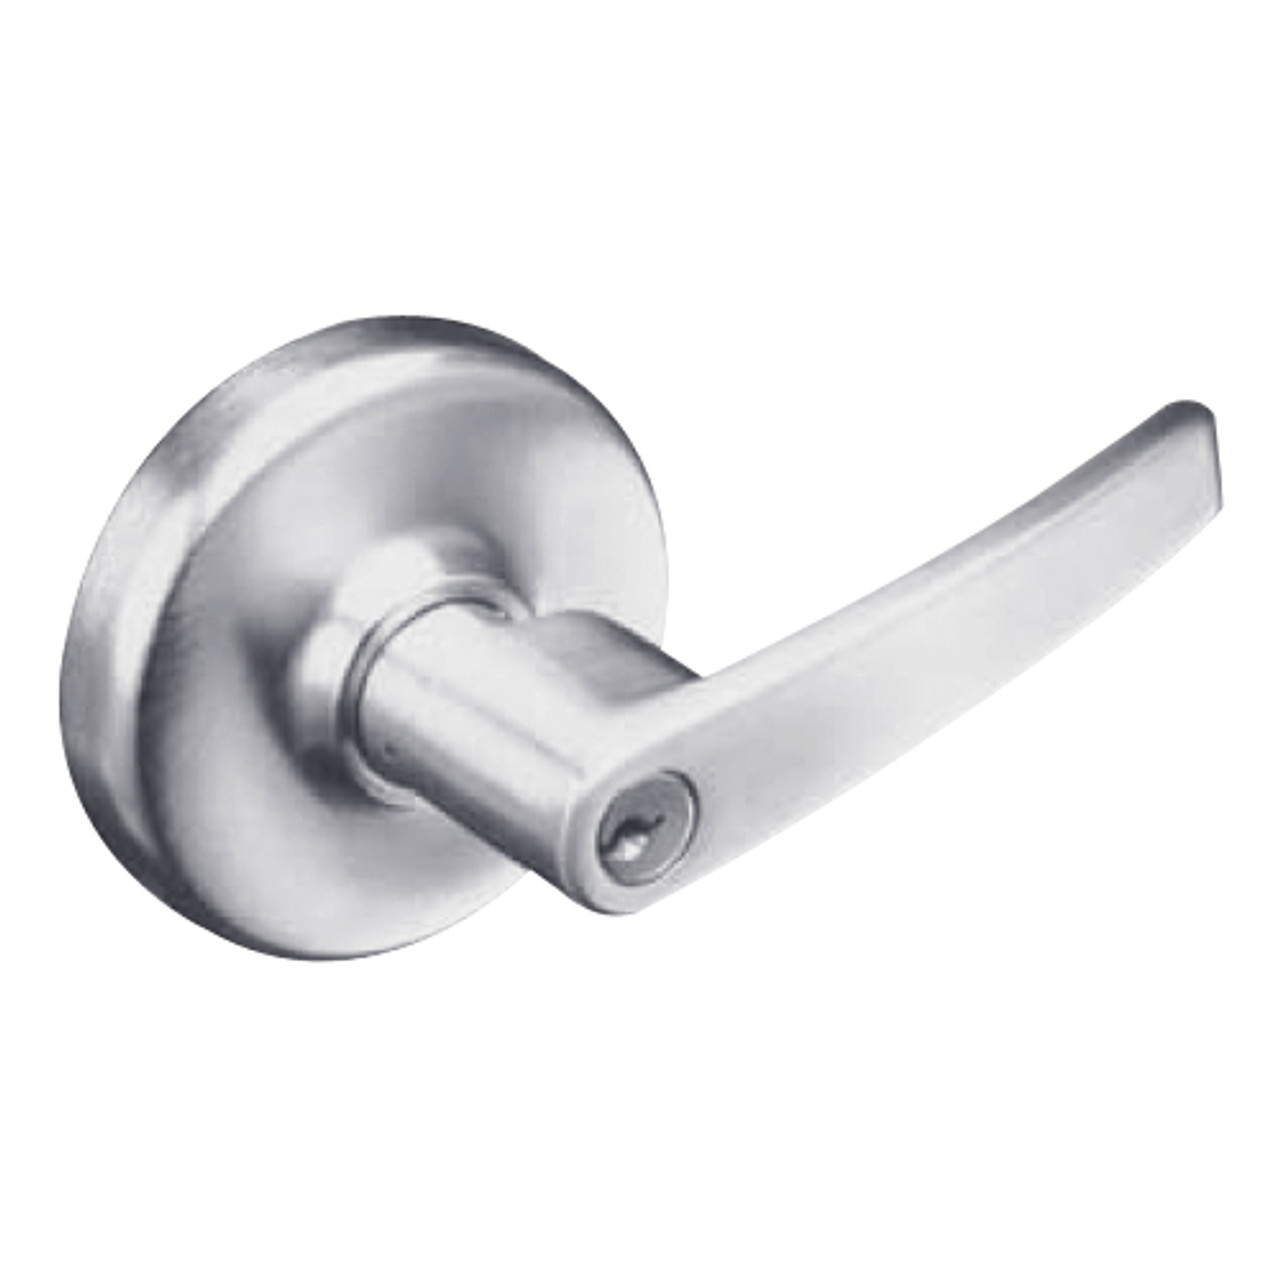 CL3161-AZD-626 Corbin CL3100 Series Vandal Resistant Entrance Cylindrical Locksets with Armstrong Lever in Satin Chrome Finish